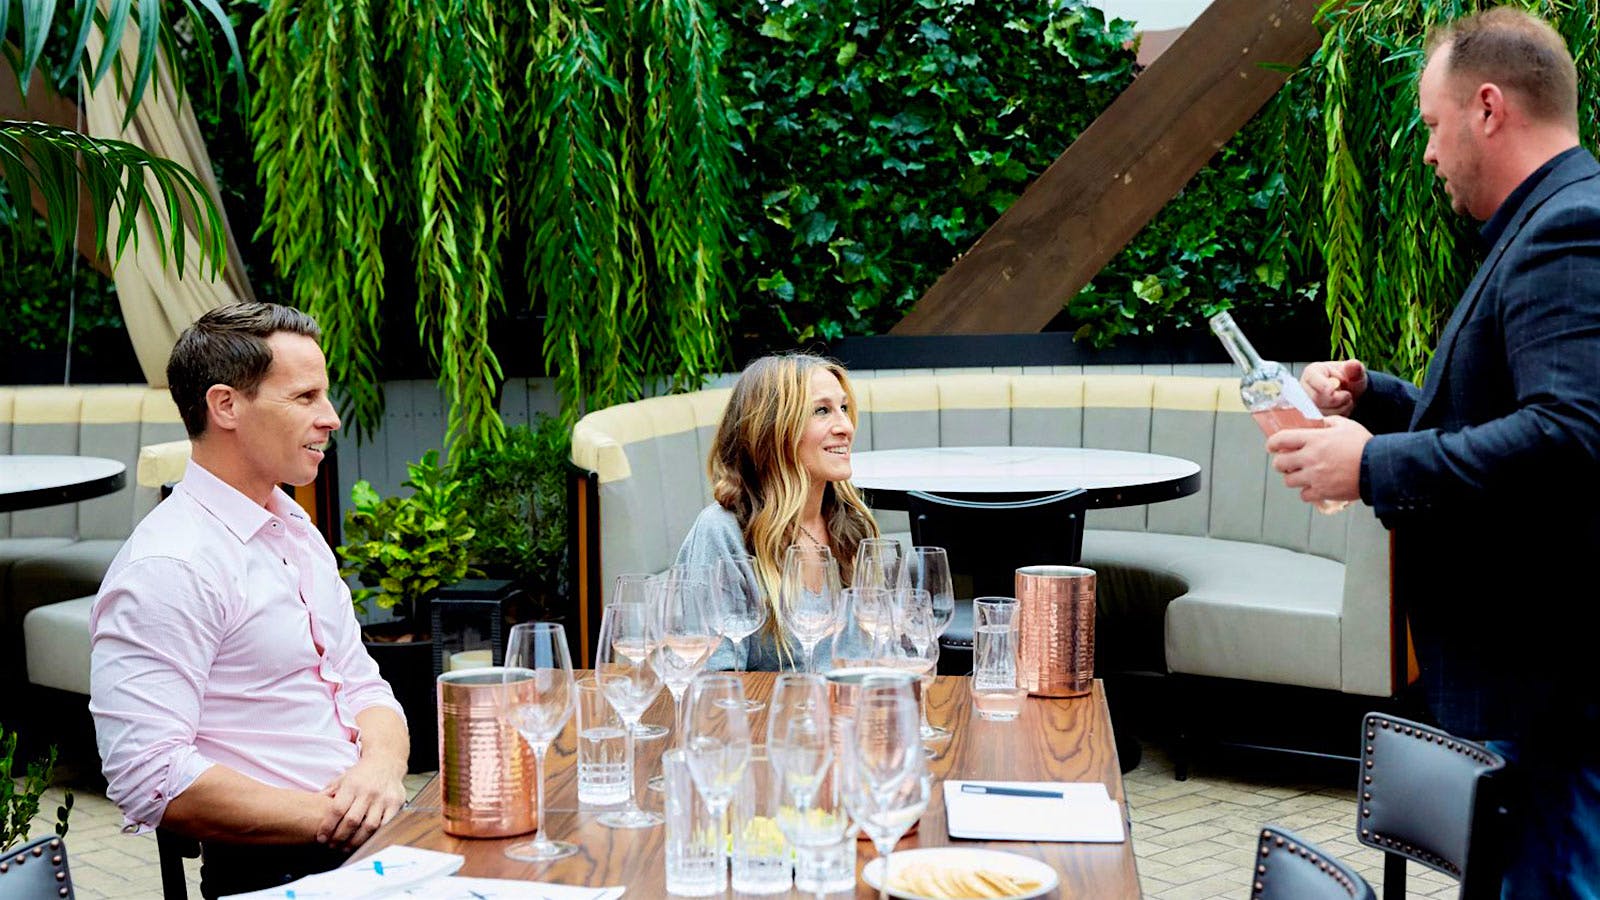 Sarah Jessica Parker Launches New Rosé, Talks Crafting Summer Wine in Parka Weather